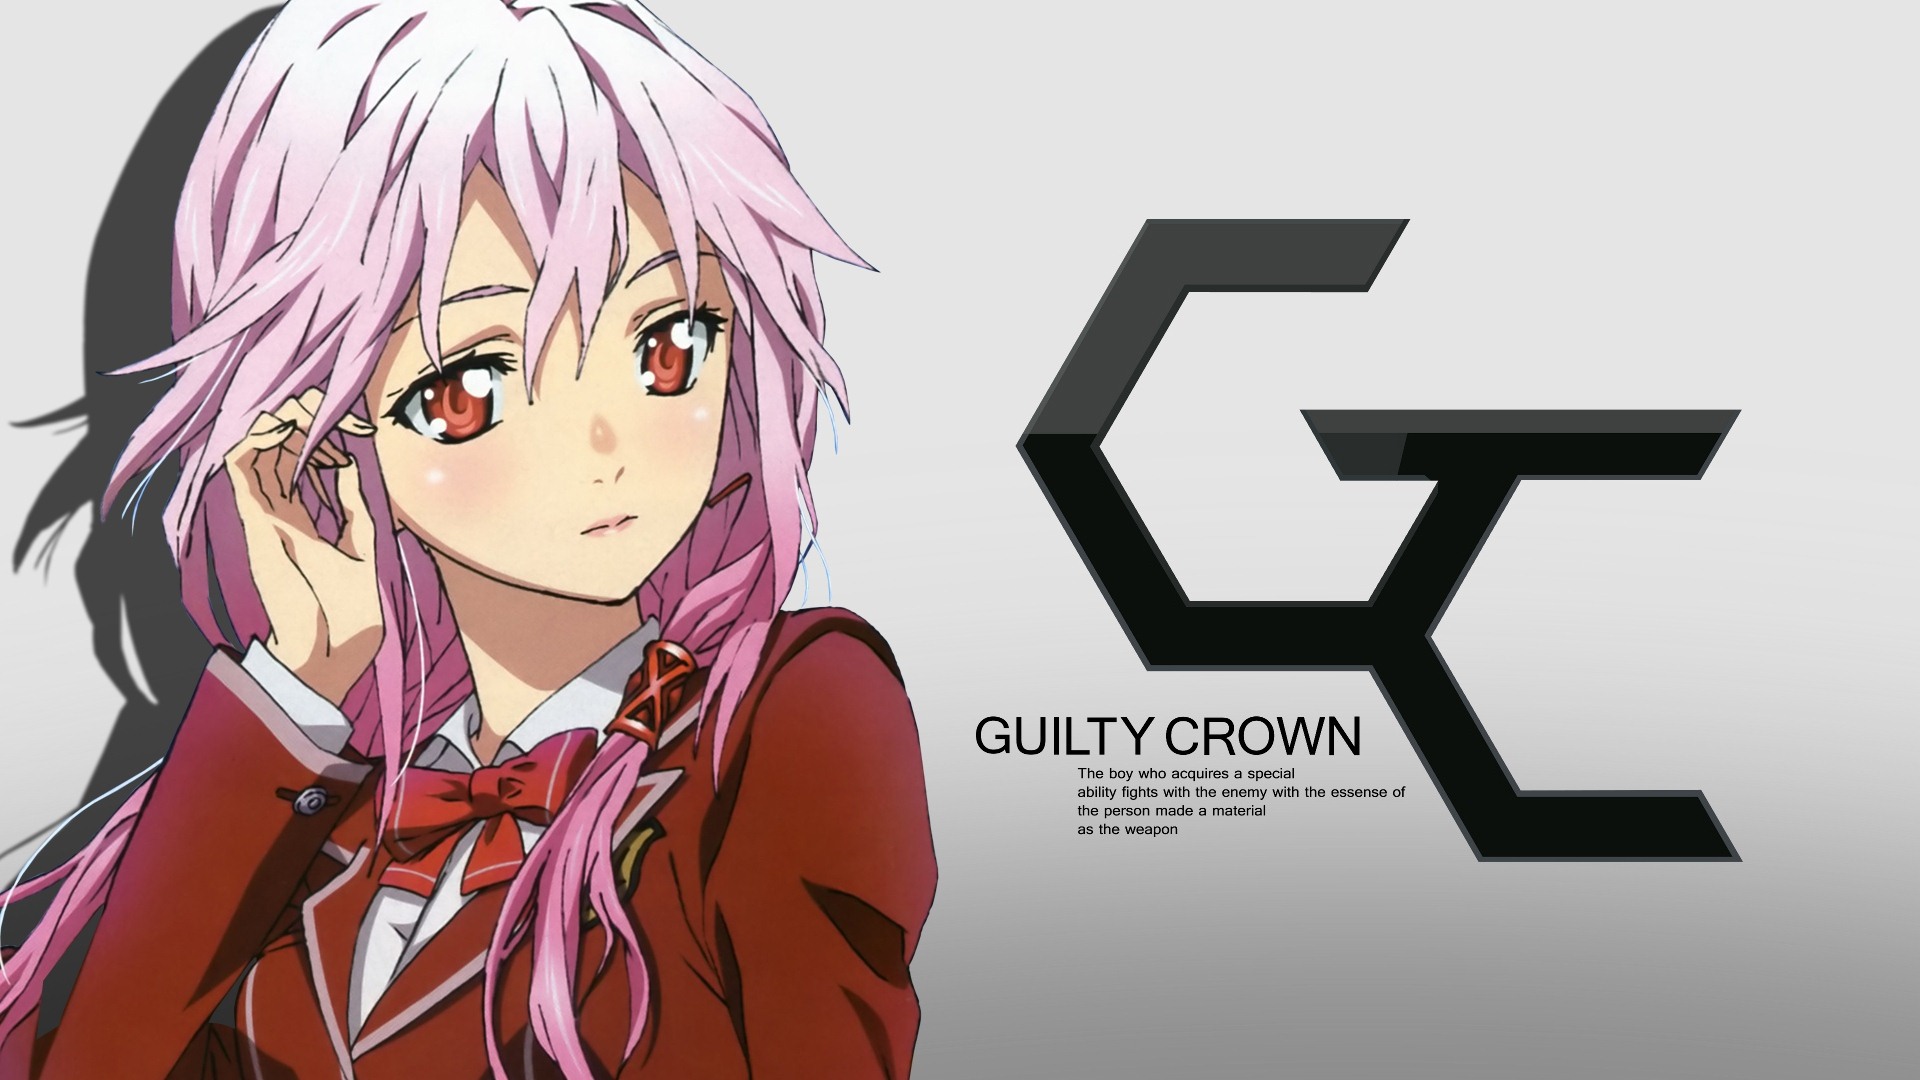 Guilty Crown 罪恶王冠 高清壁纸8 - 1920x1080